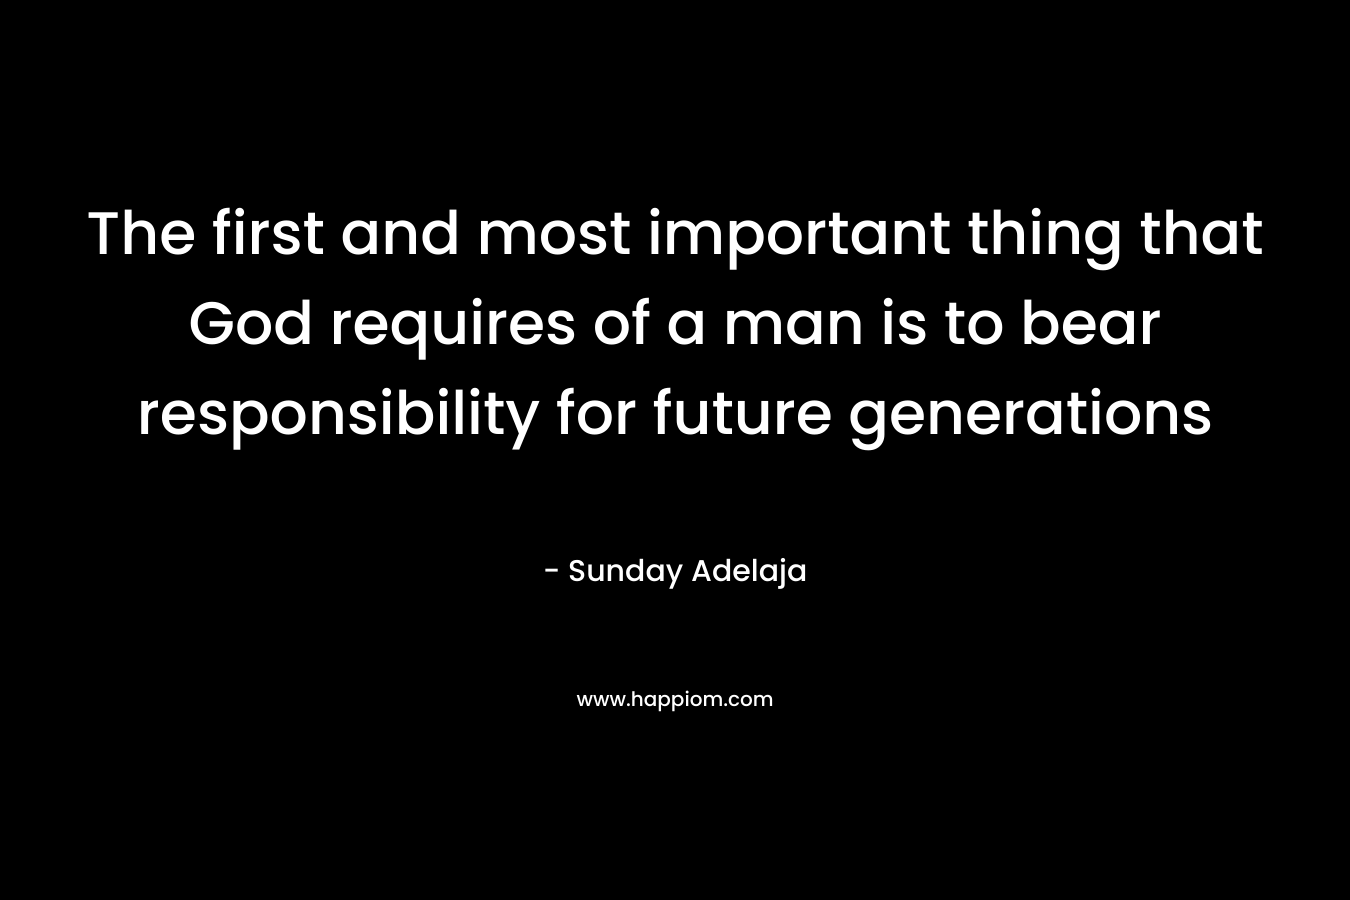 The first and most important thing that God requires of a man is to bear responsibility for future generations – Sunday Adelaja